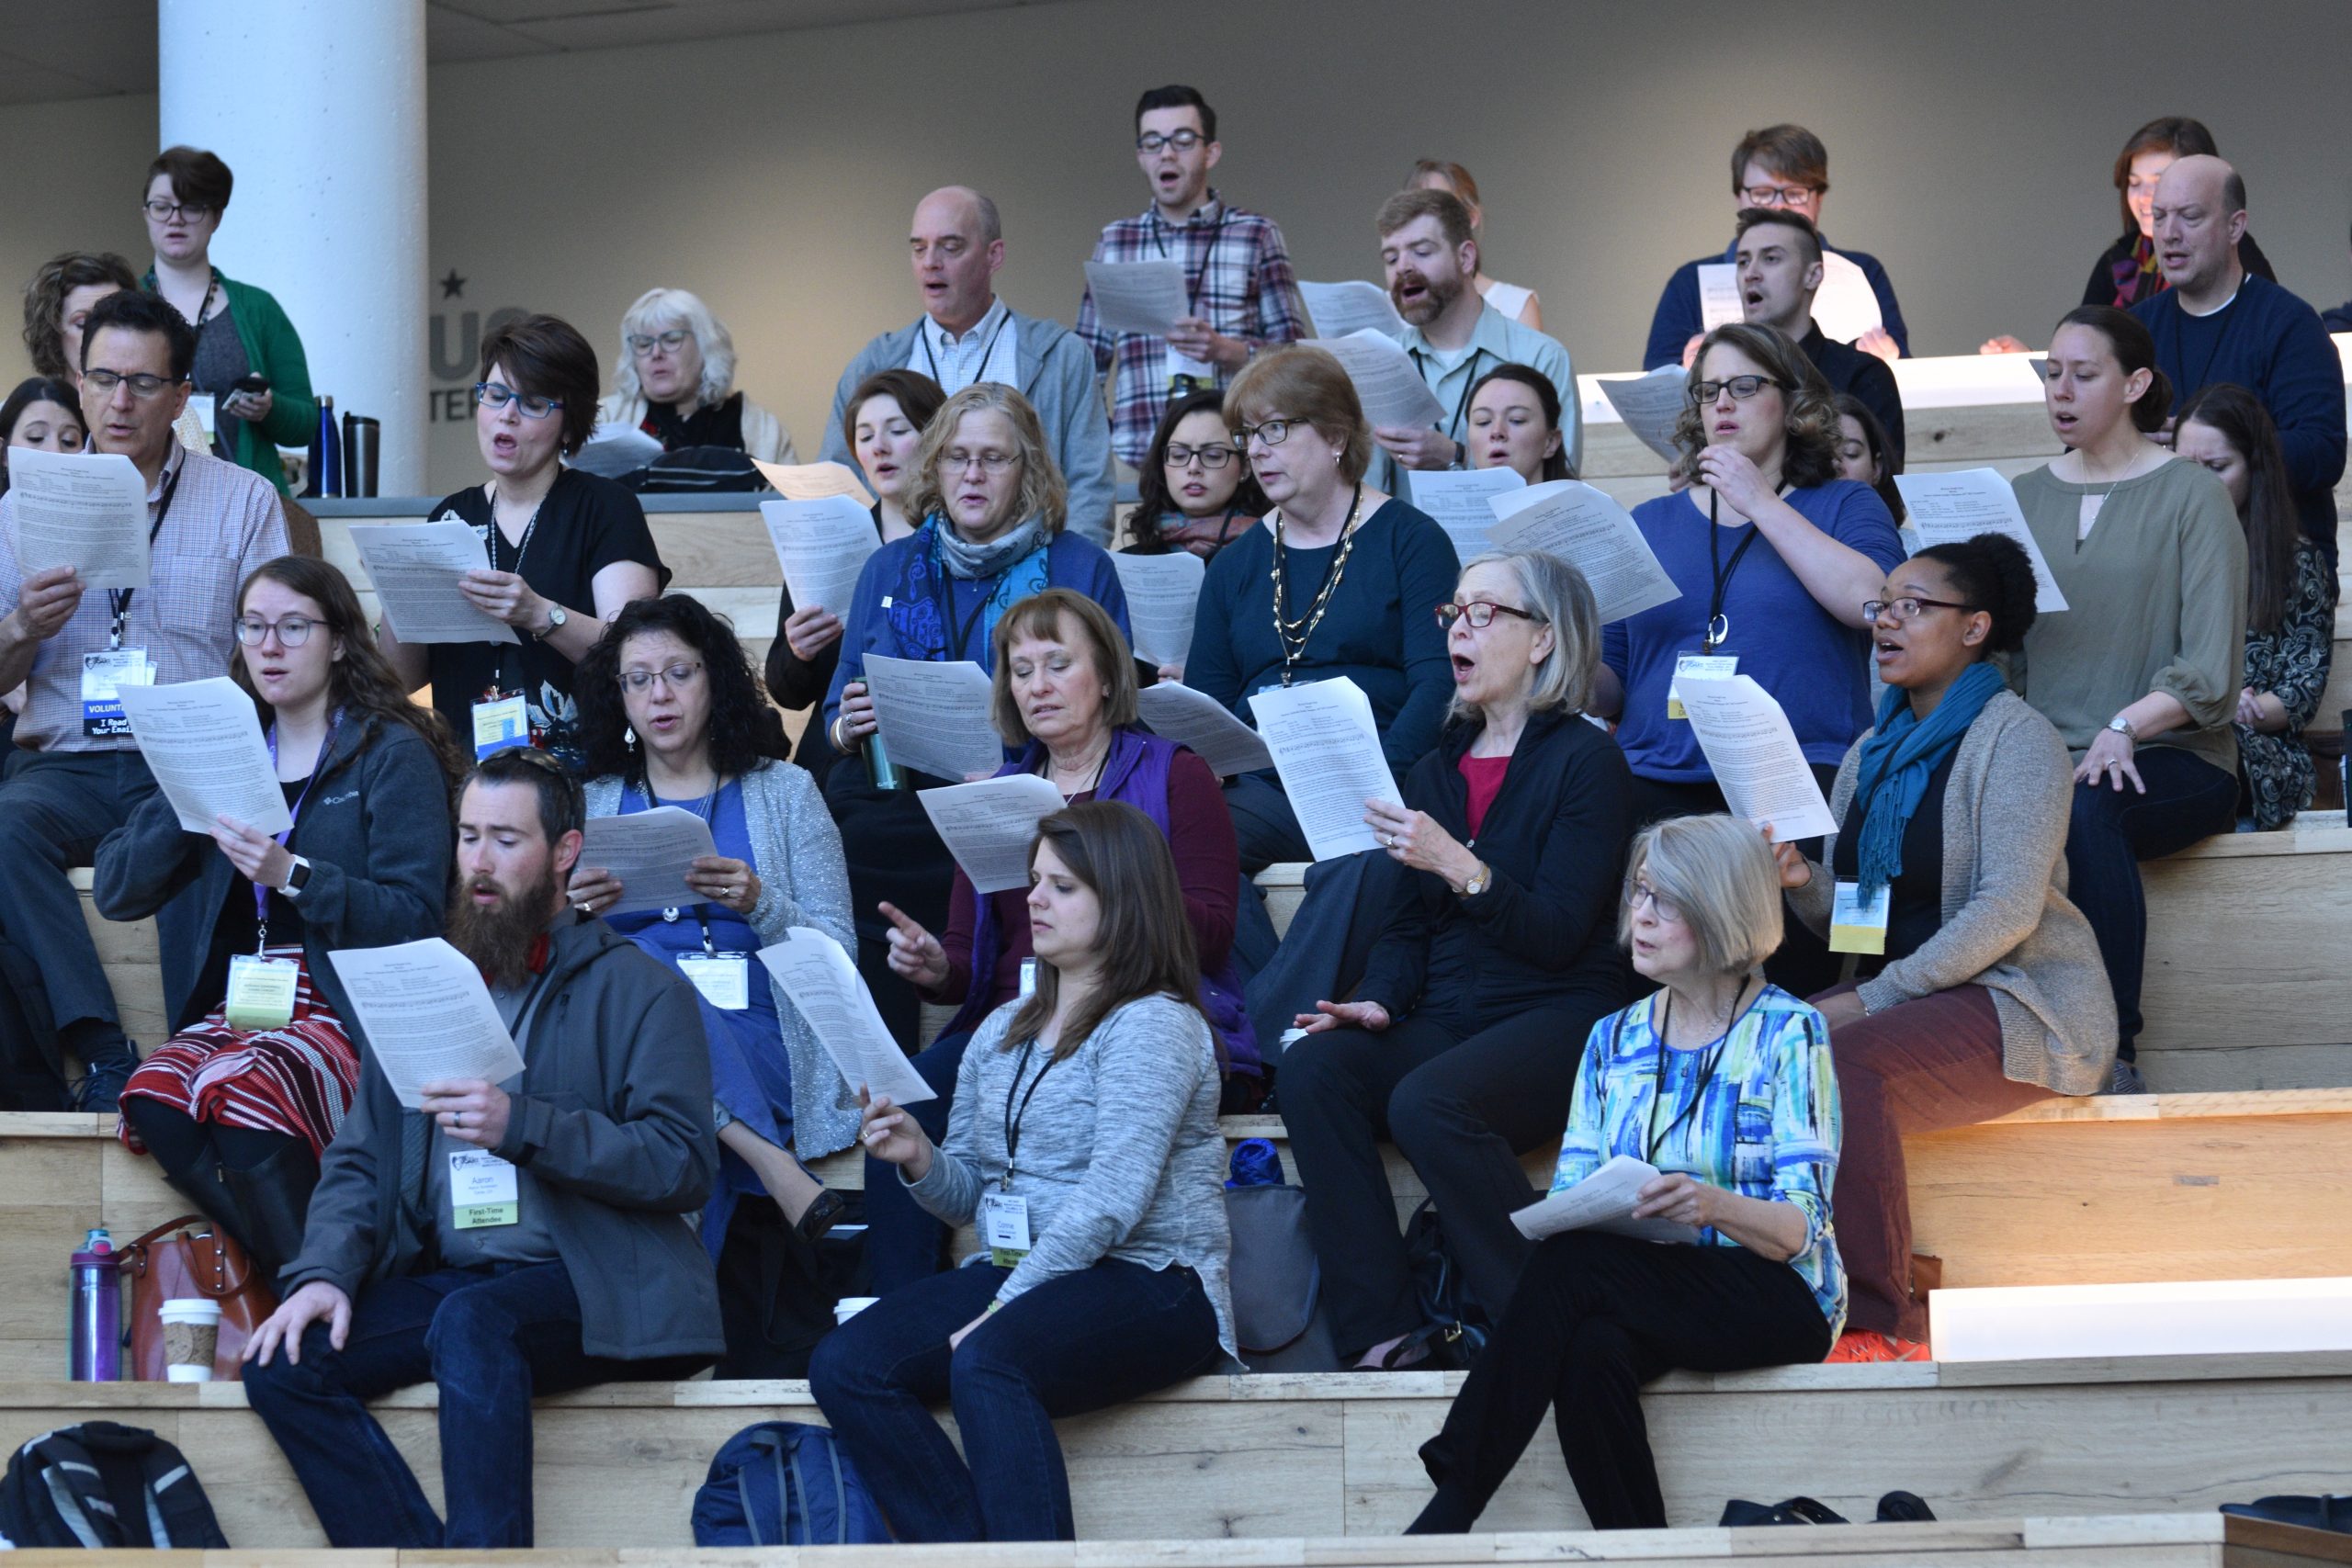 A picture of various conference attendees singing from sheet music 